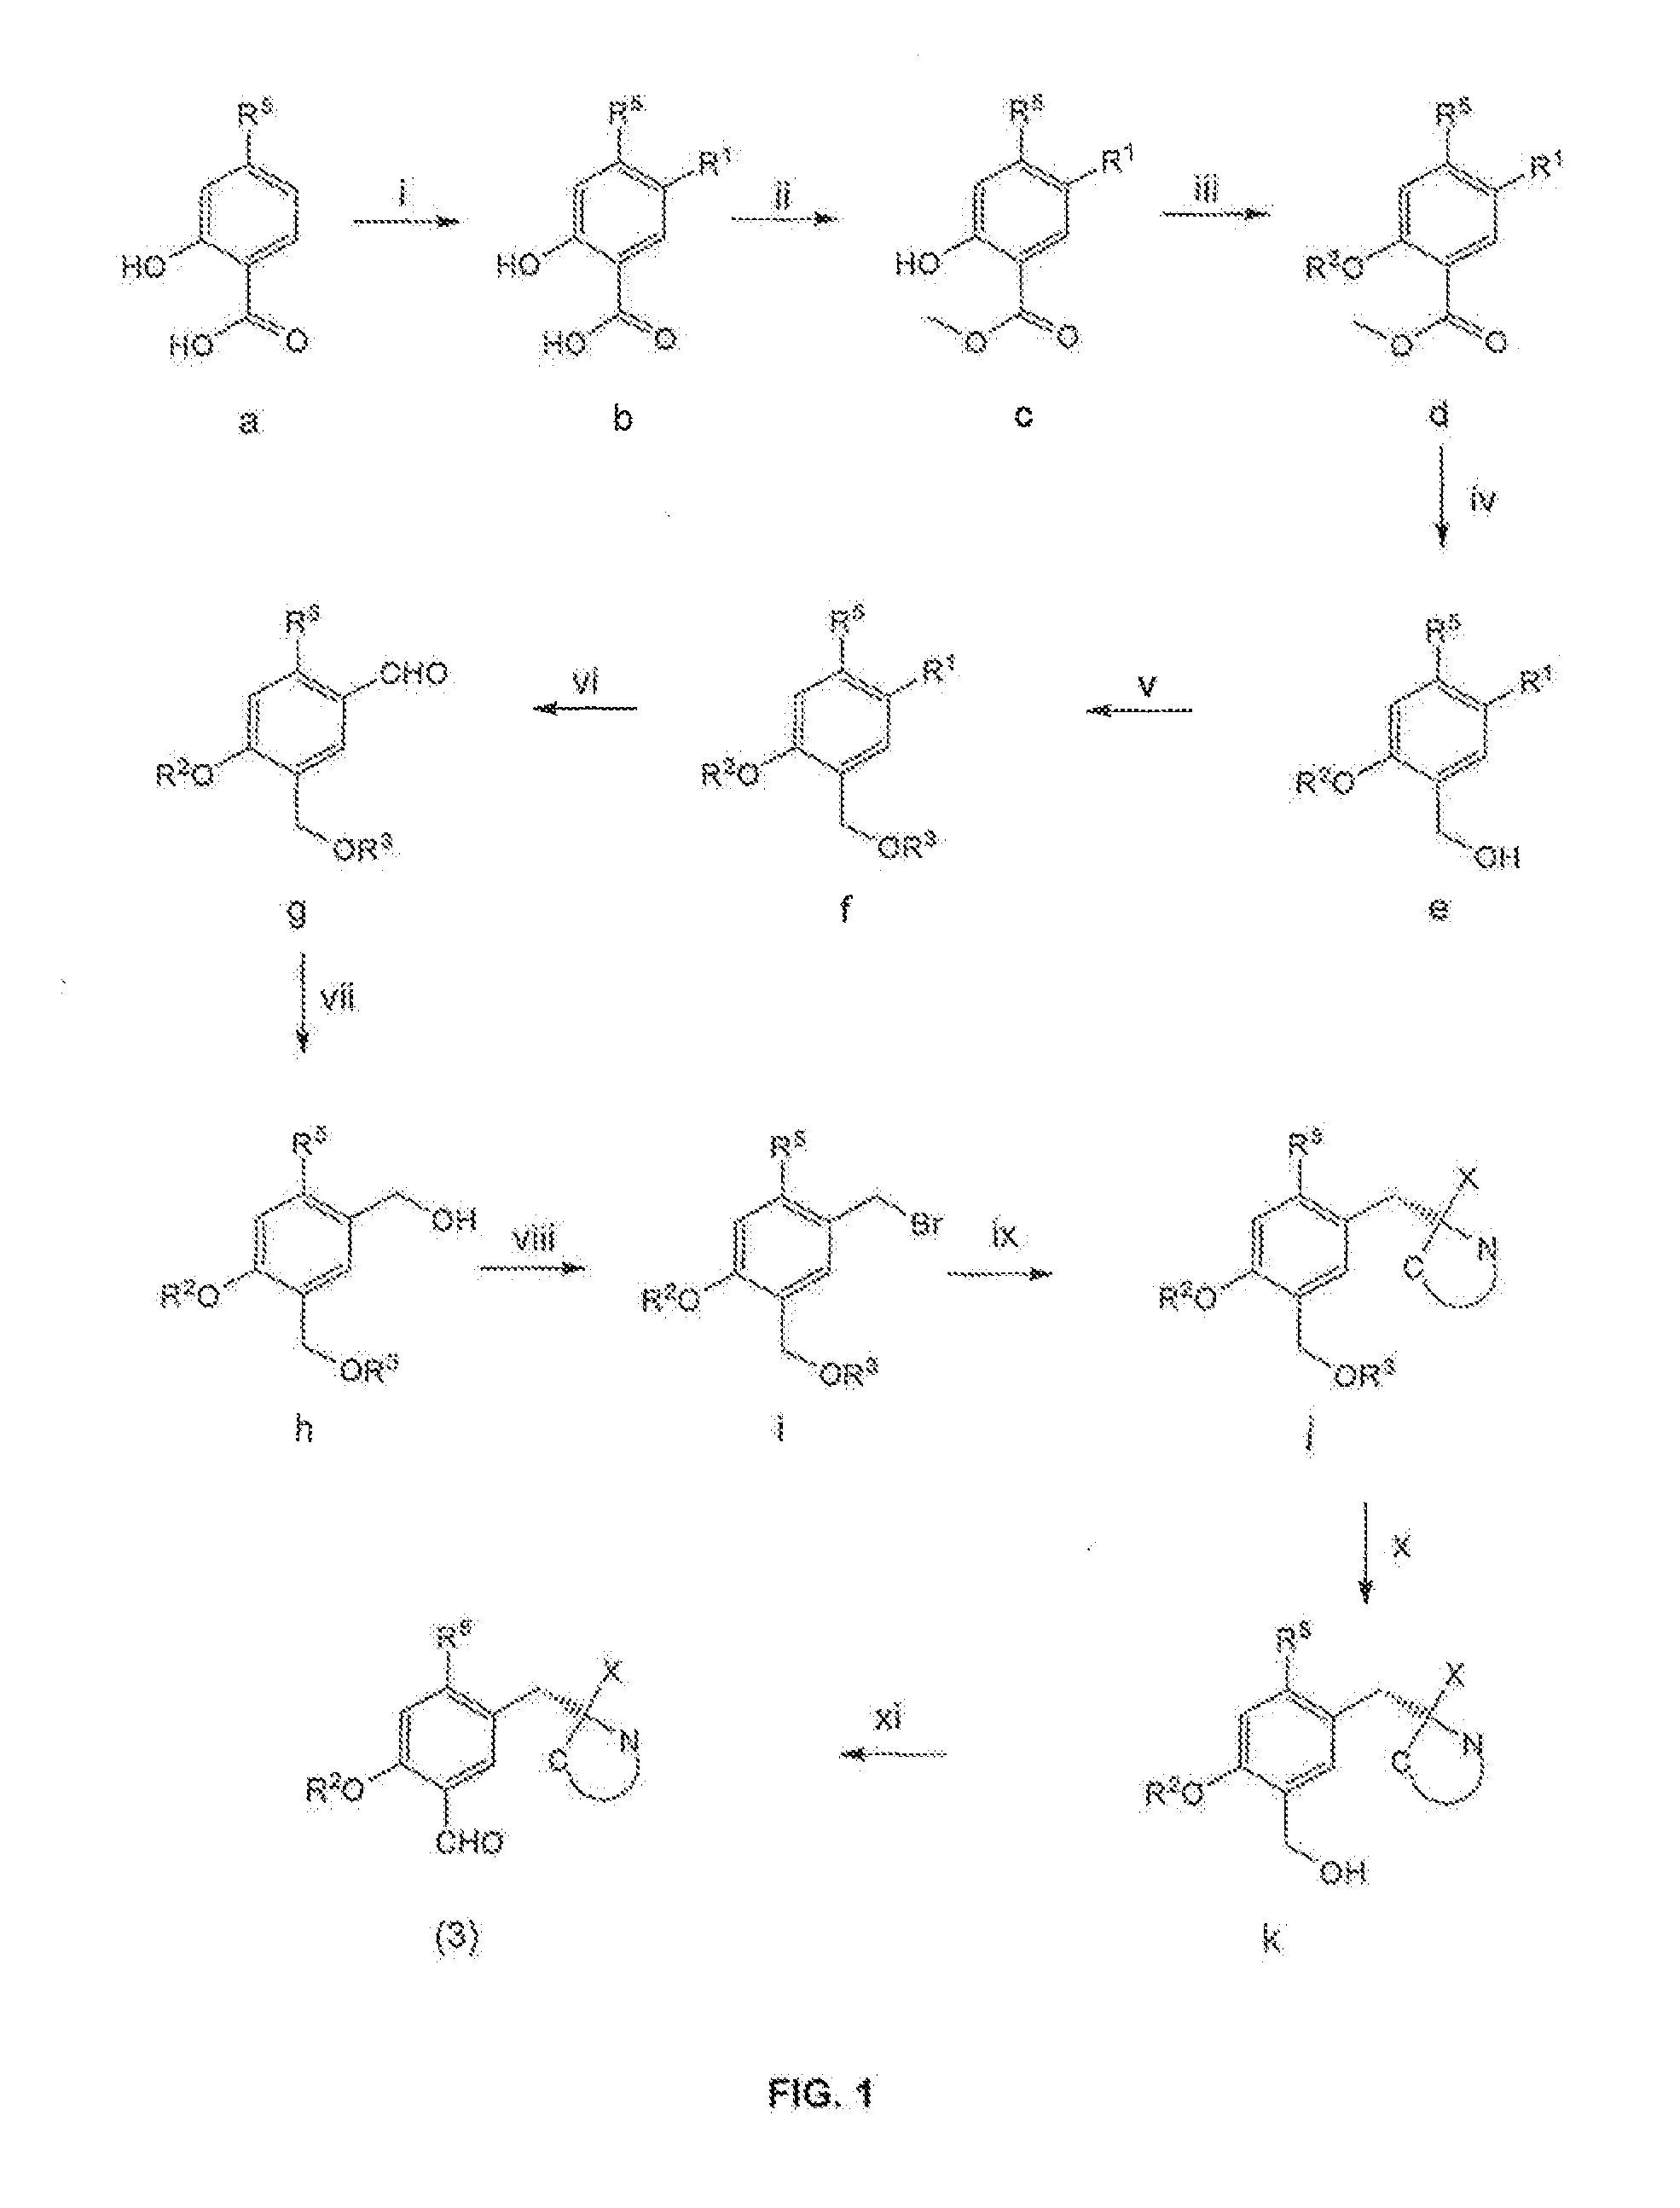 Method for producing precursors for l-3,4-dihydroxy-6-[18f]fluorophenylalanine and 2-[18f]fluoro-l-tyrosine and the a-methylated derivatives thereof, precursor, and method for producing l-3,4dihydroxy-6-[18f]fluorophenylalanine and 2-[18f]fluoro-l-tyrosine and the a-methylated derivatives from the precursor